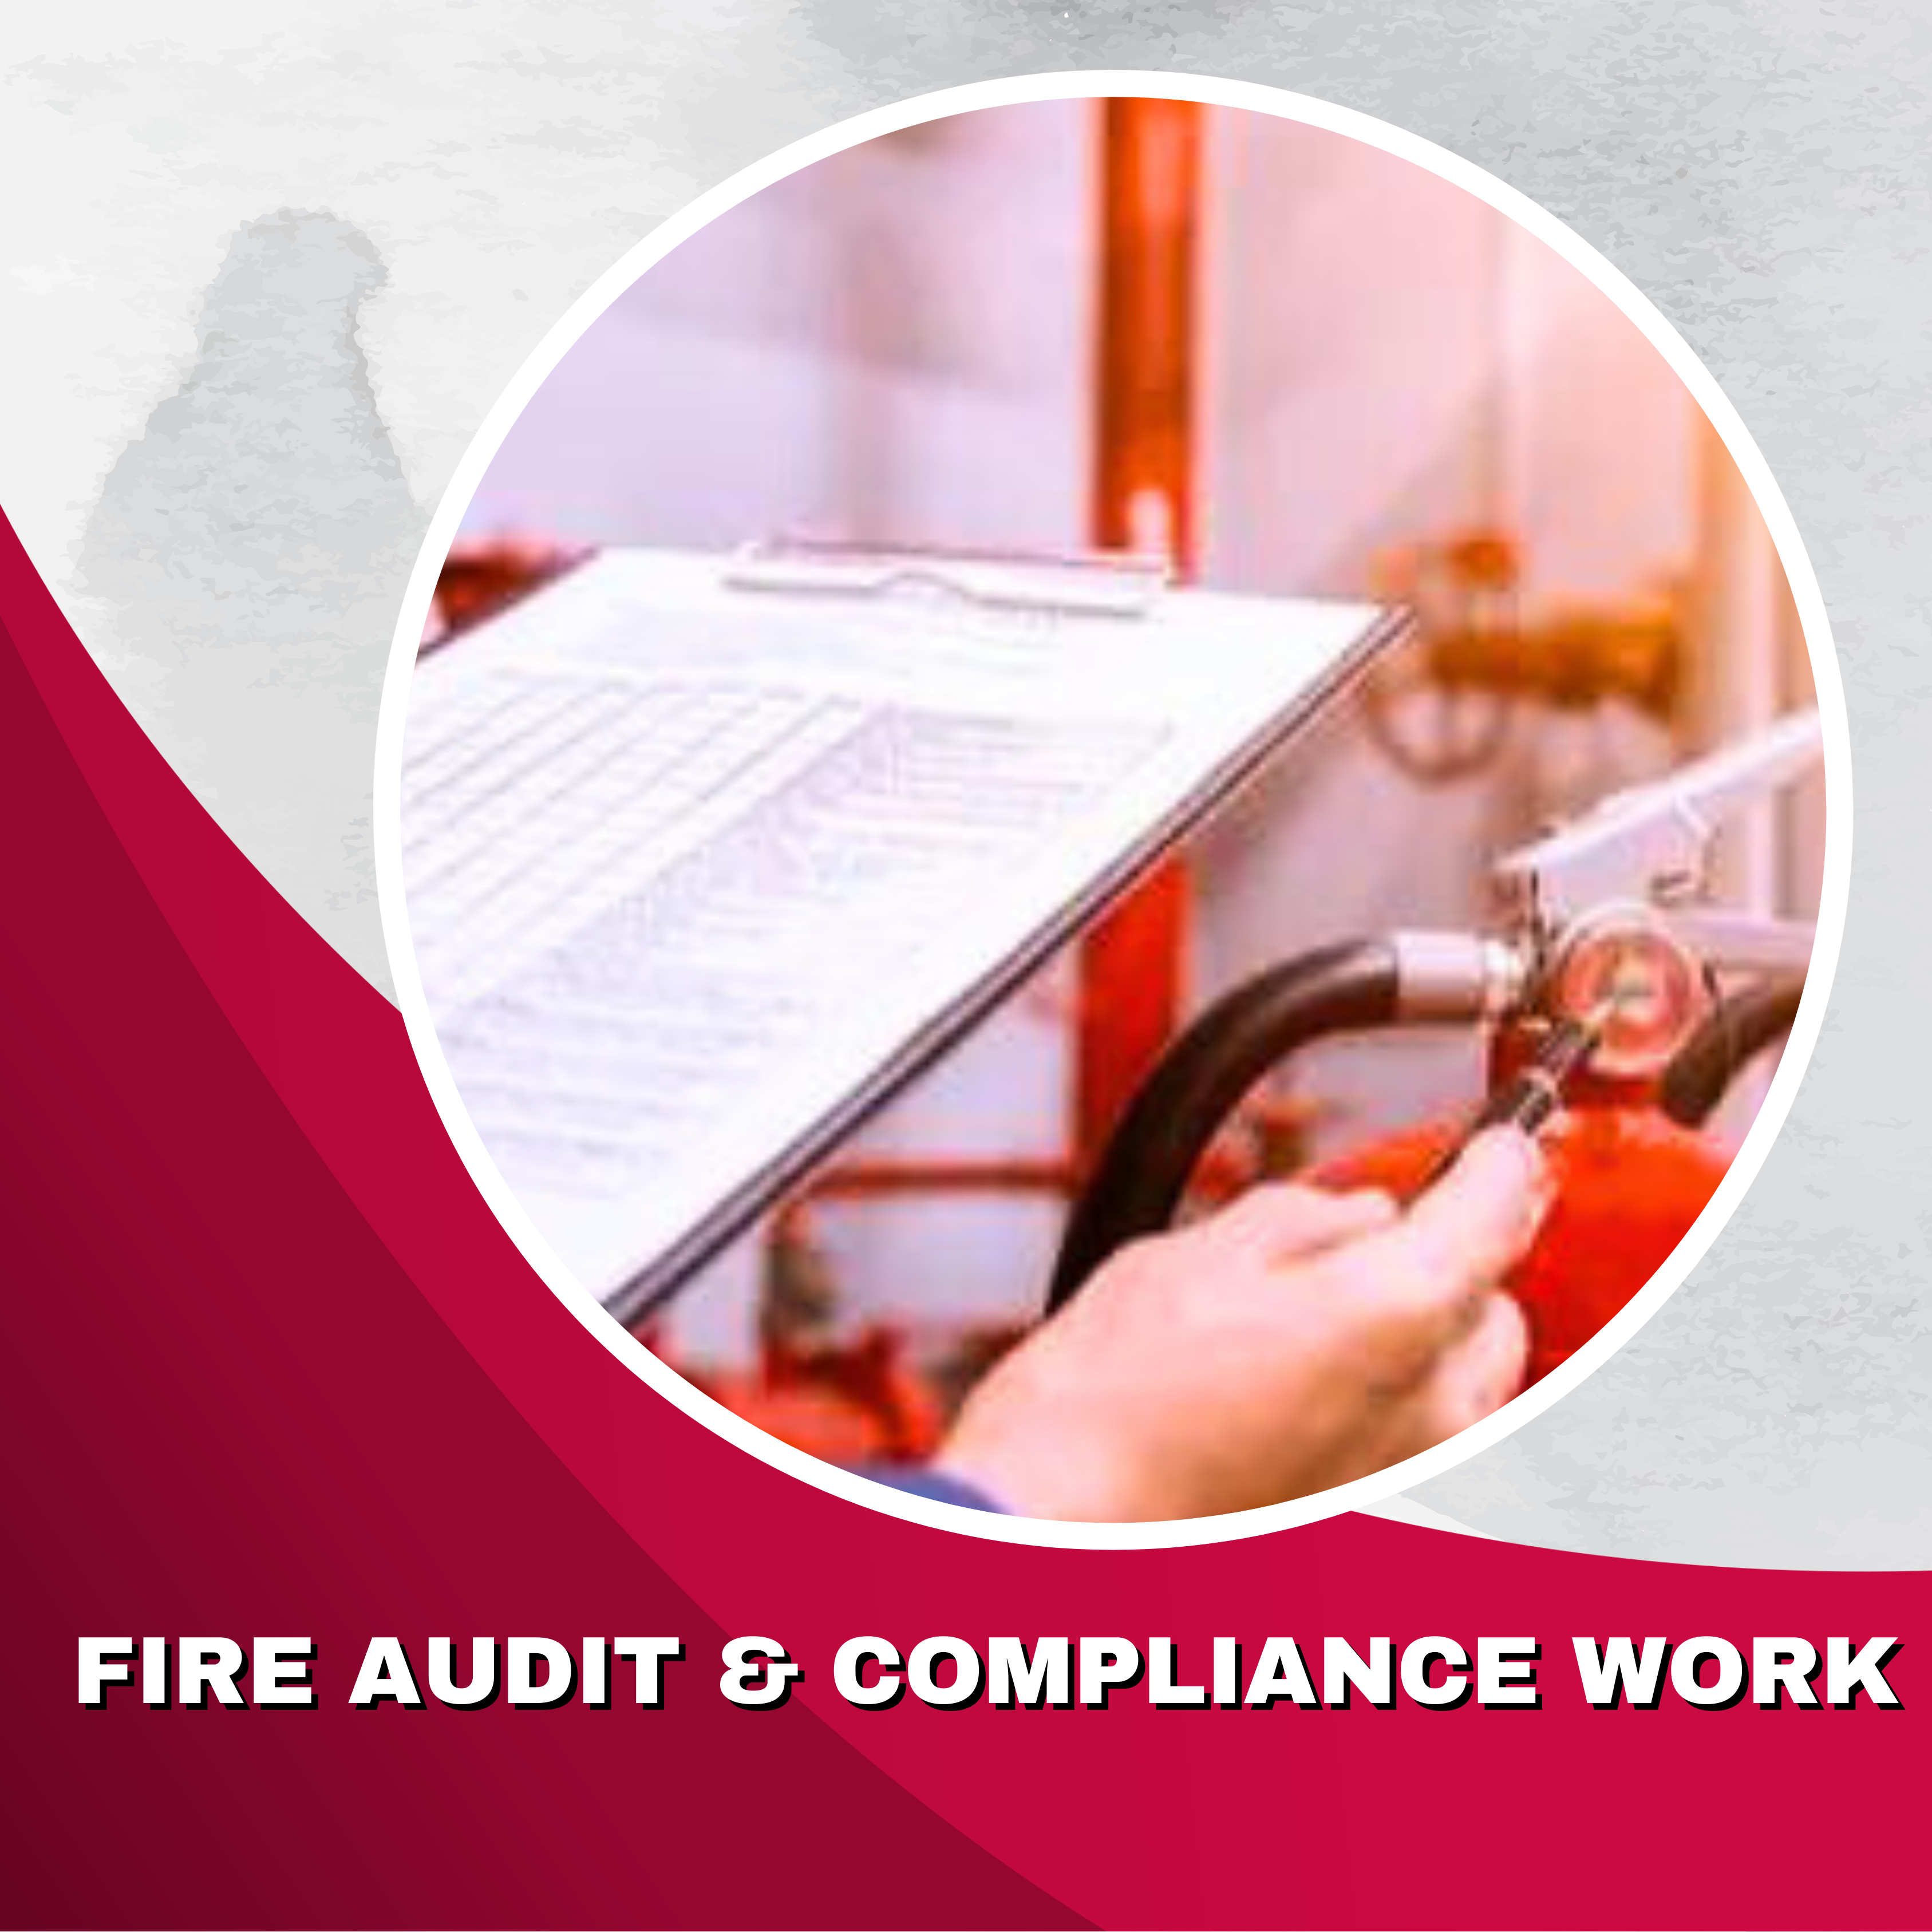 FIRE AUDIT AND COMPLIANCE WORK - FIRE CHAMPS